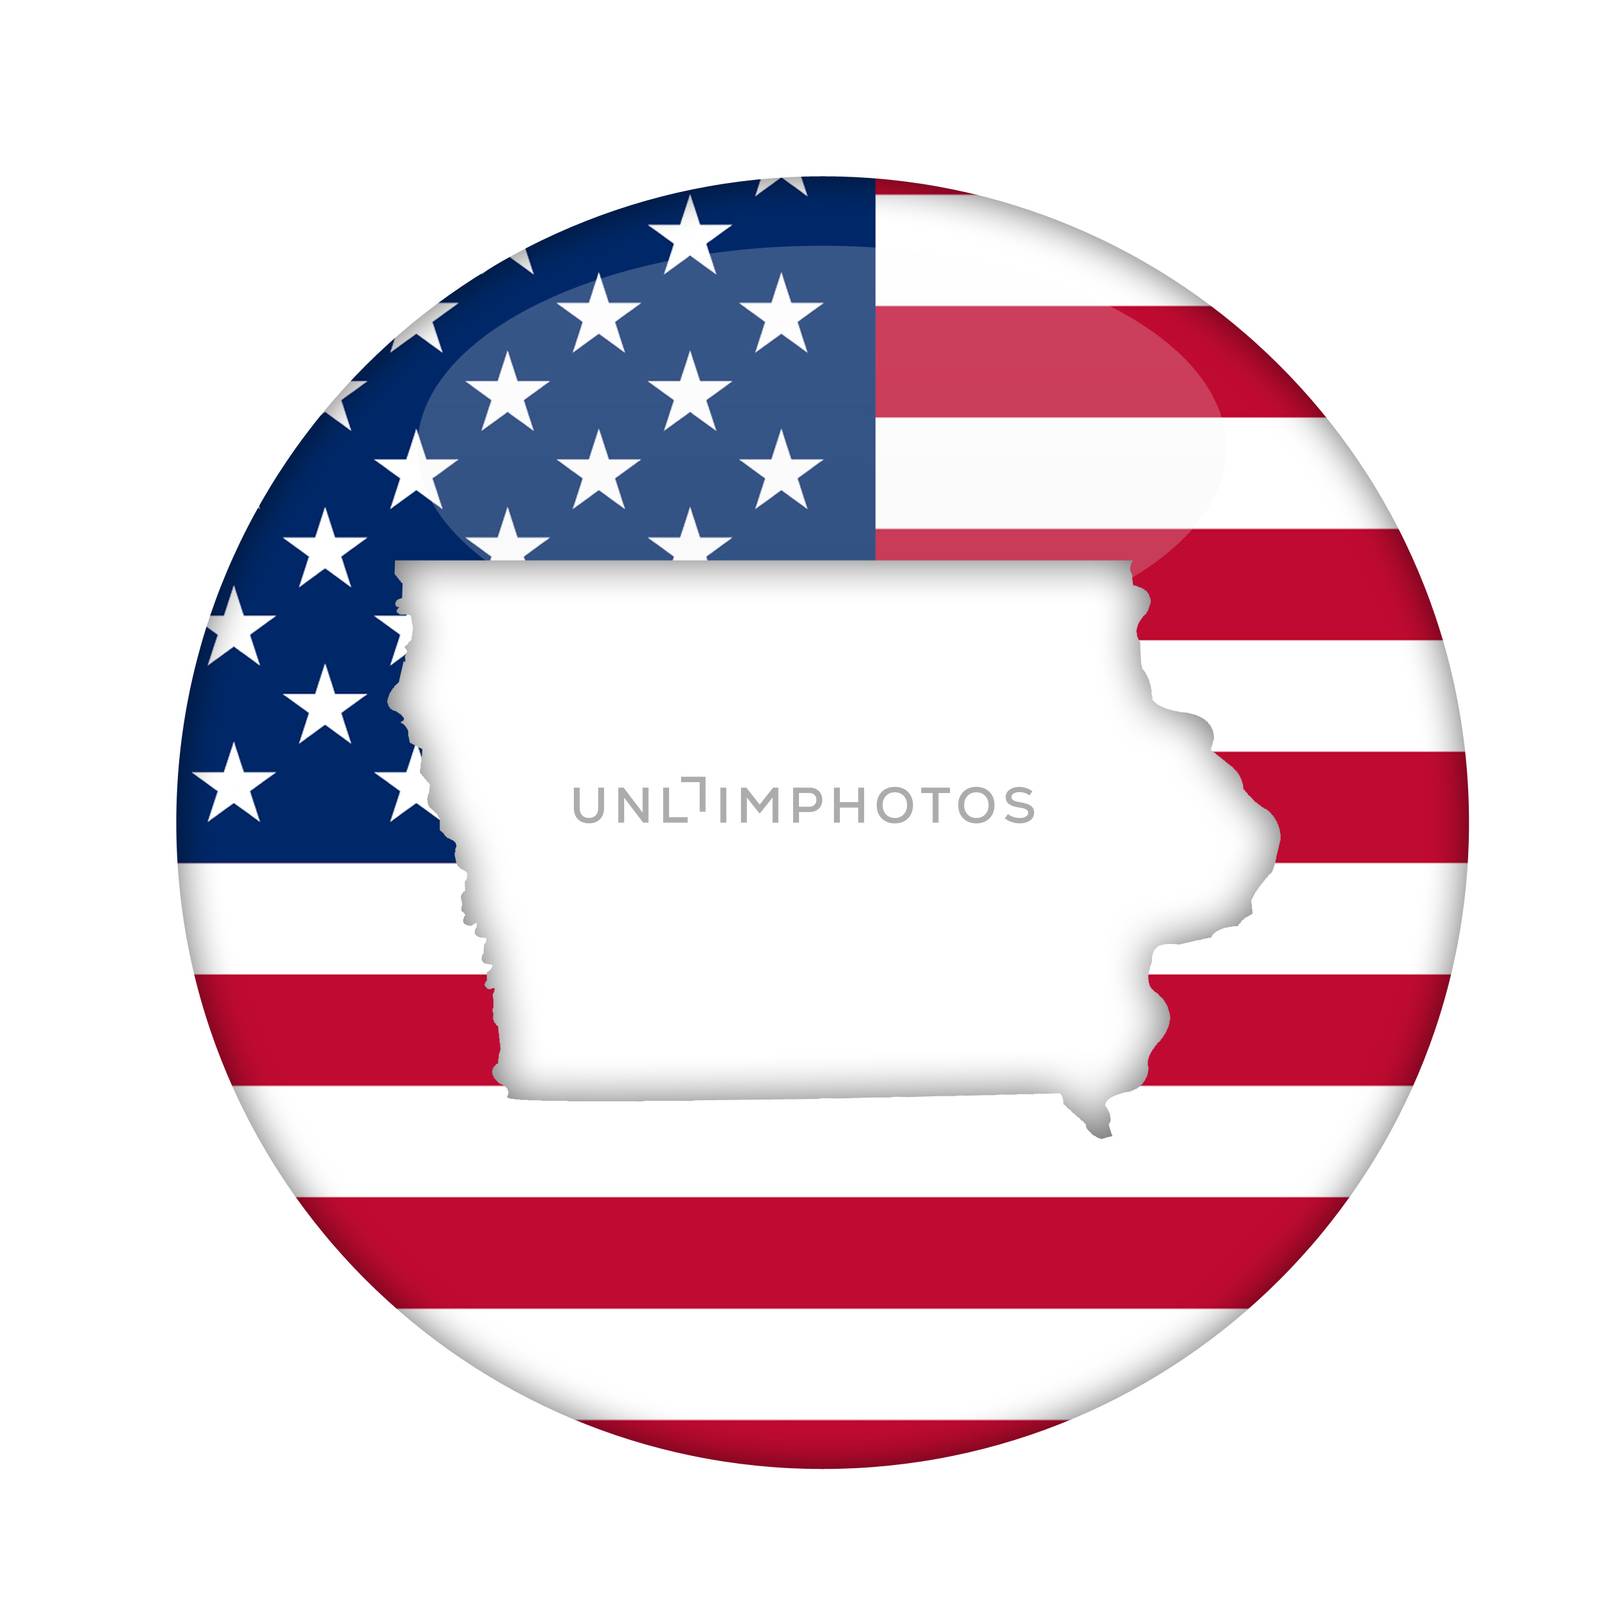 Iowa state of America badge by speedfighter